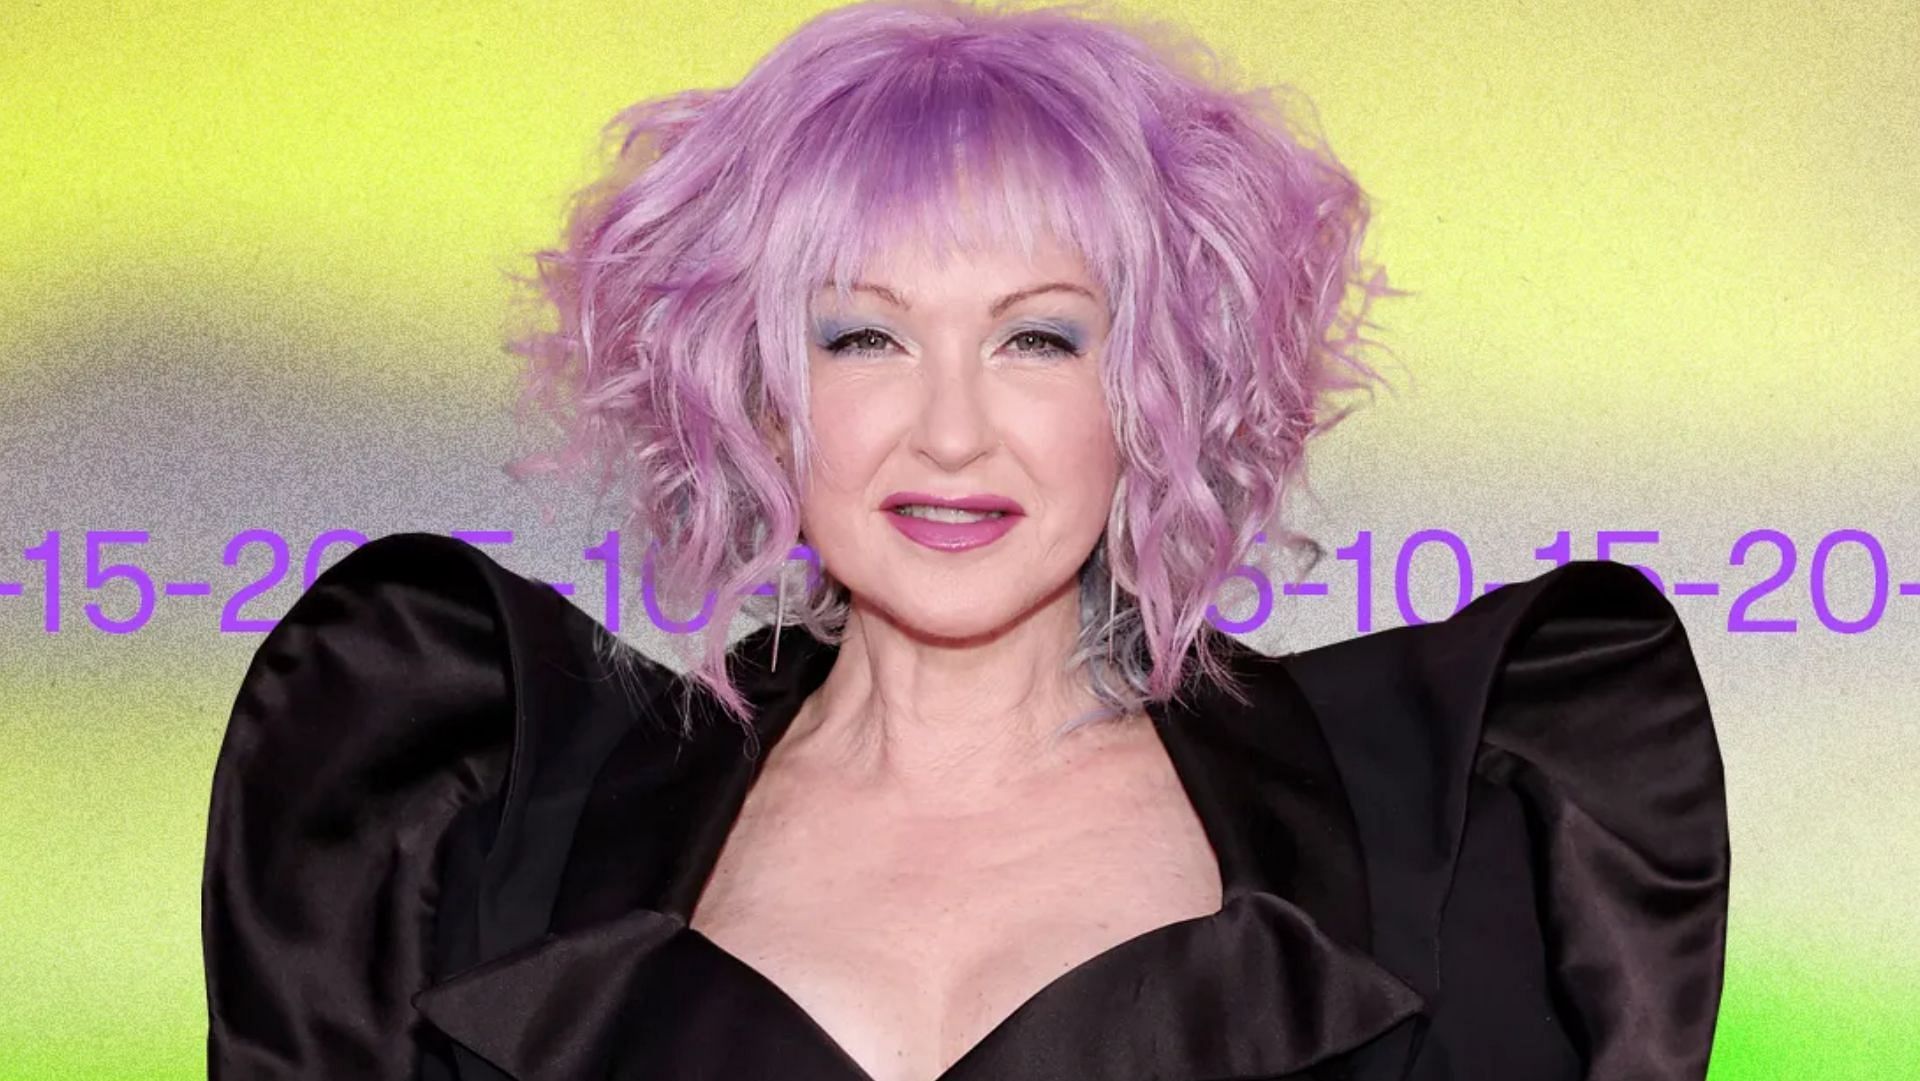 Cyndi Lauper has been married to David Thornton for 30 years. (Photo via Arturo Holmes/Getty Images)